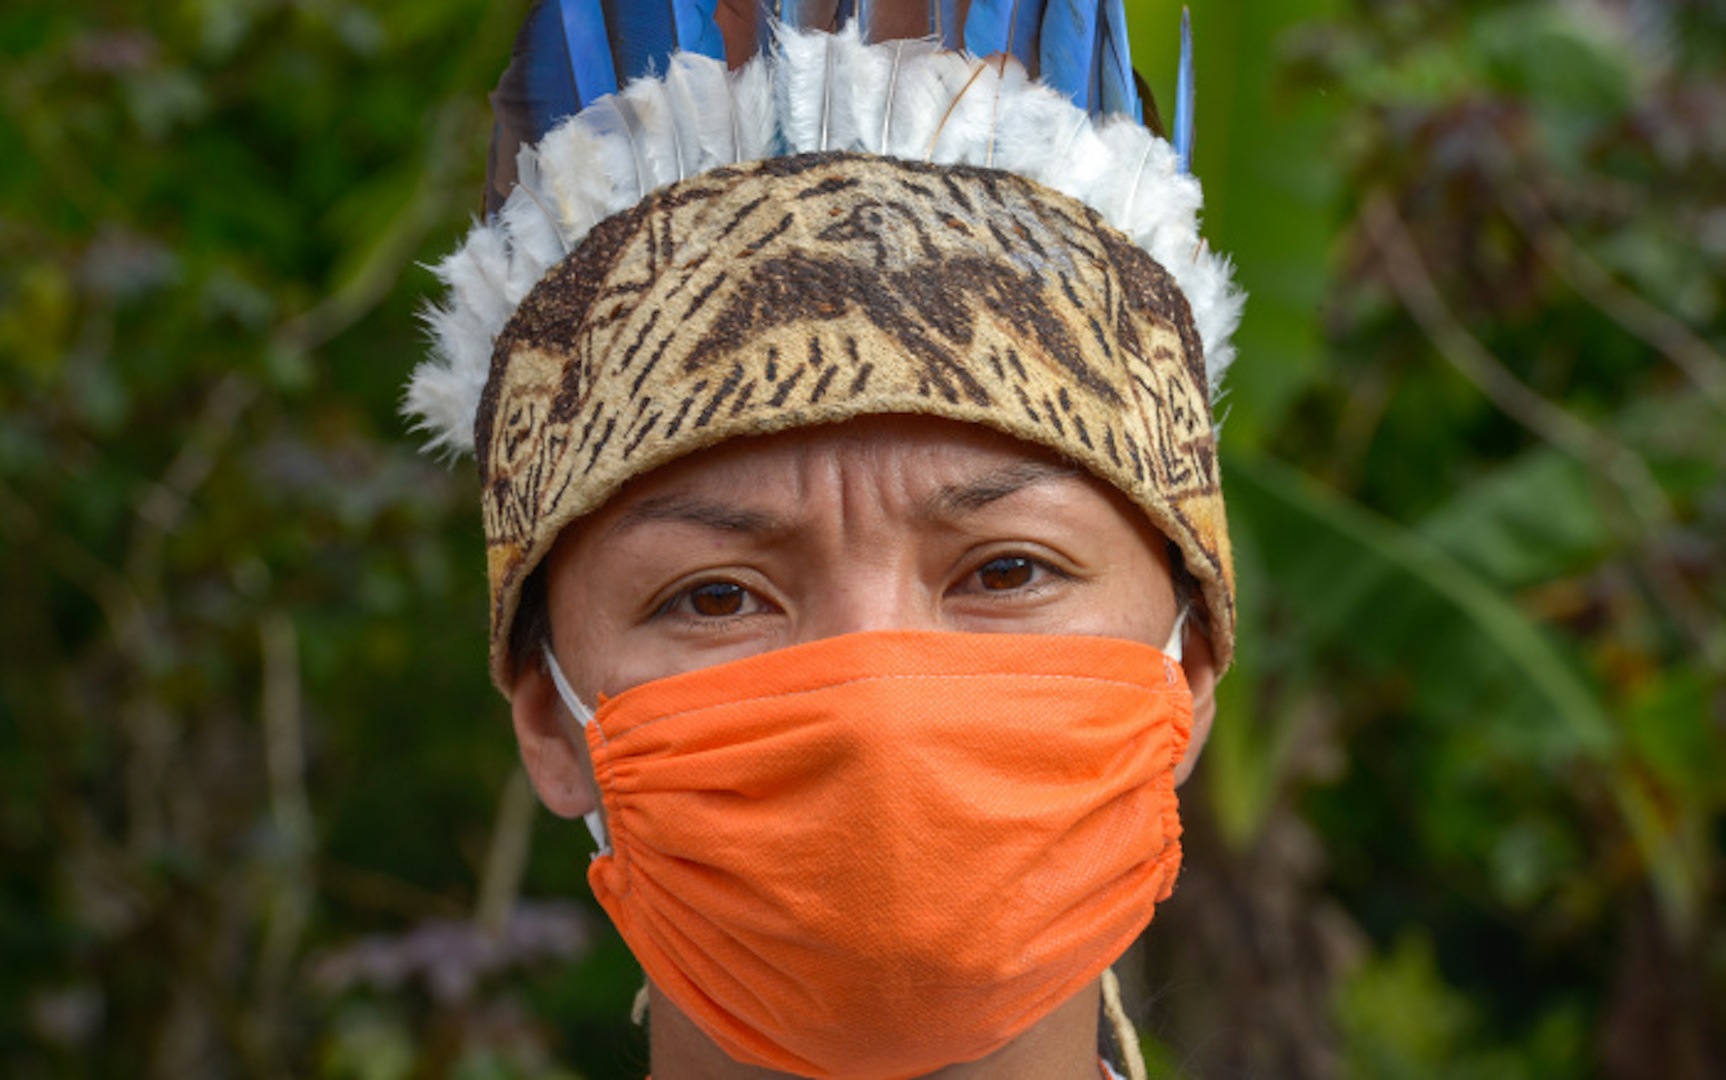 Countries which make up the Amazon region are not doing enough, say indigenous leaders